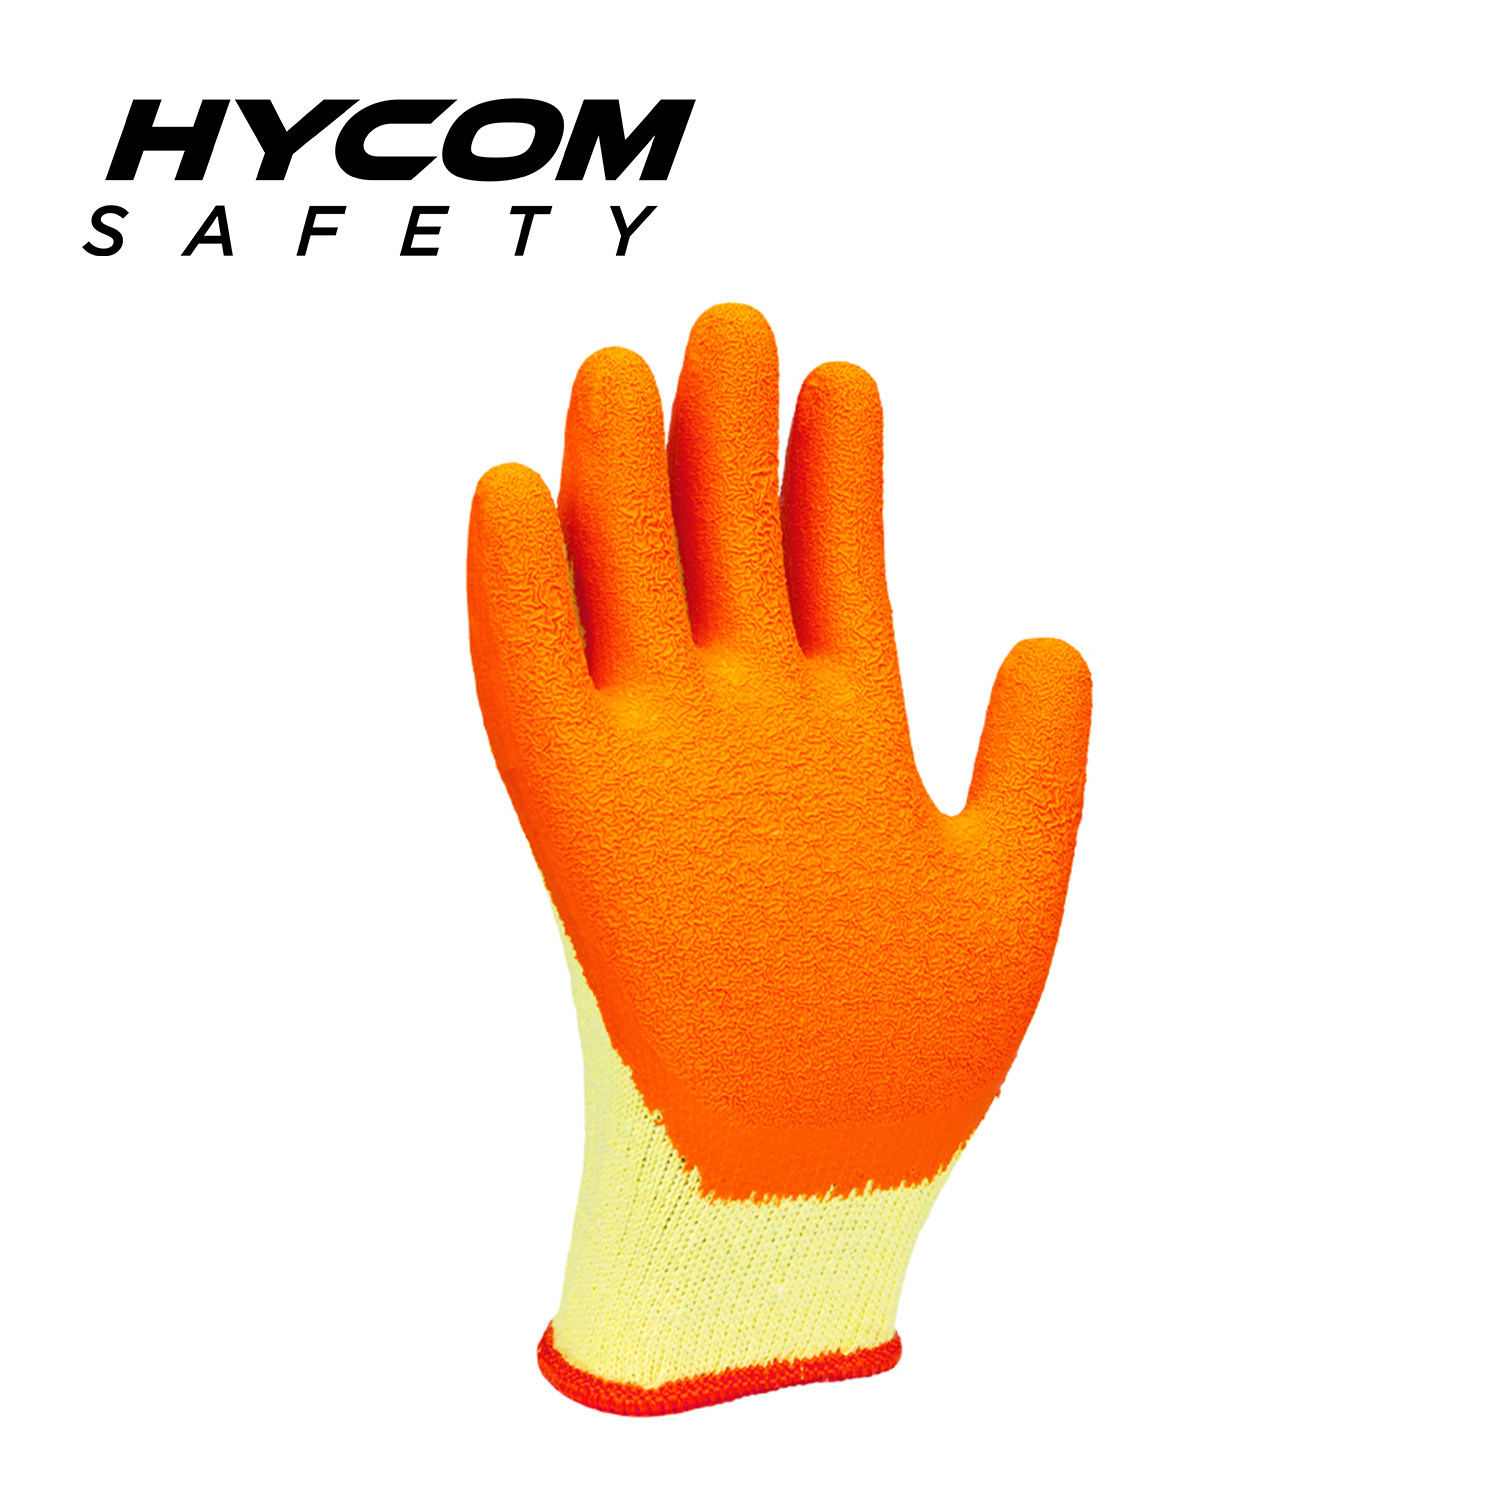 HYCOM 10G Cotton/polyester Work Glove with Palm Crinkle Latex Coating Super Grip General Purpose Glove